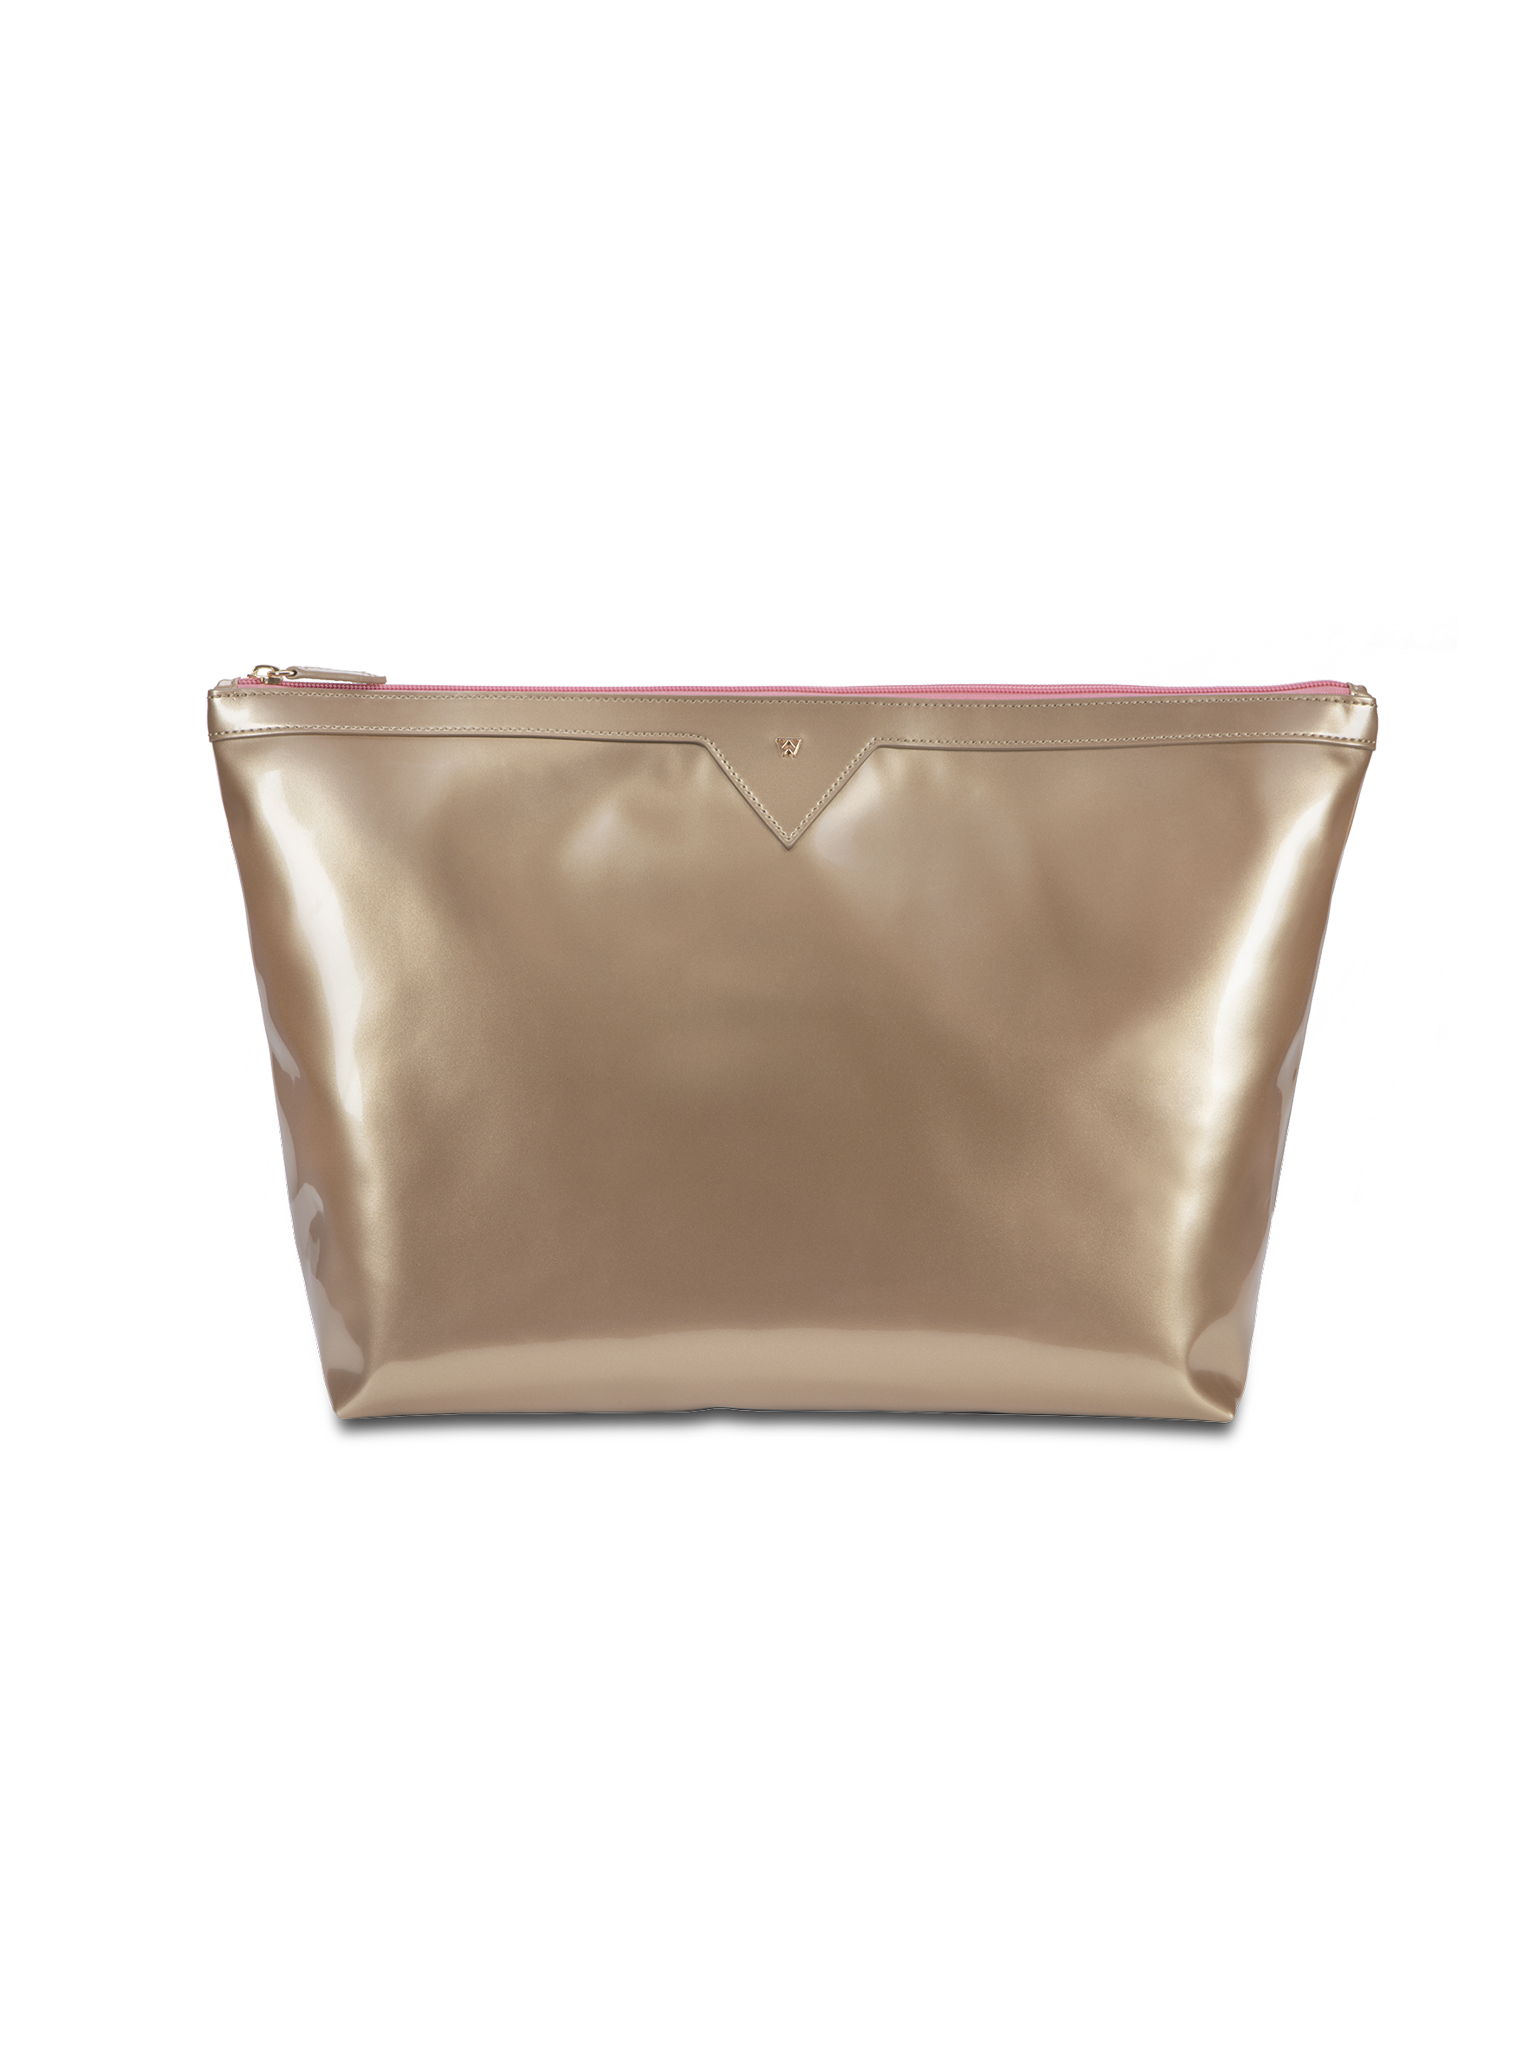 Keep your precious belongings cool and protected with our removable, zipper closed, interior pouch in champagne gold 